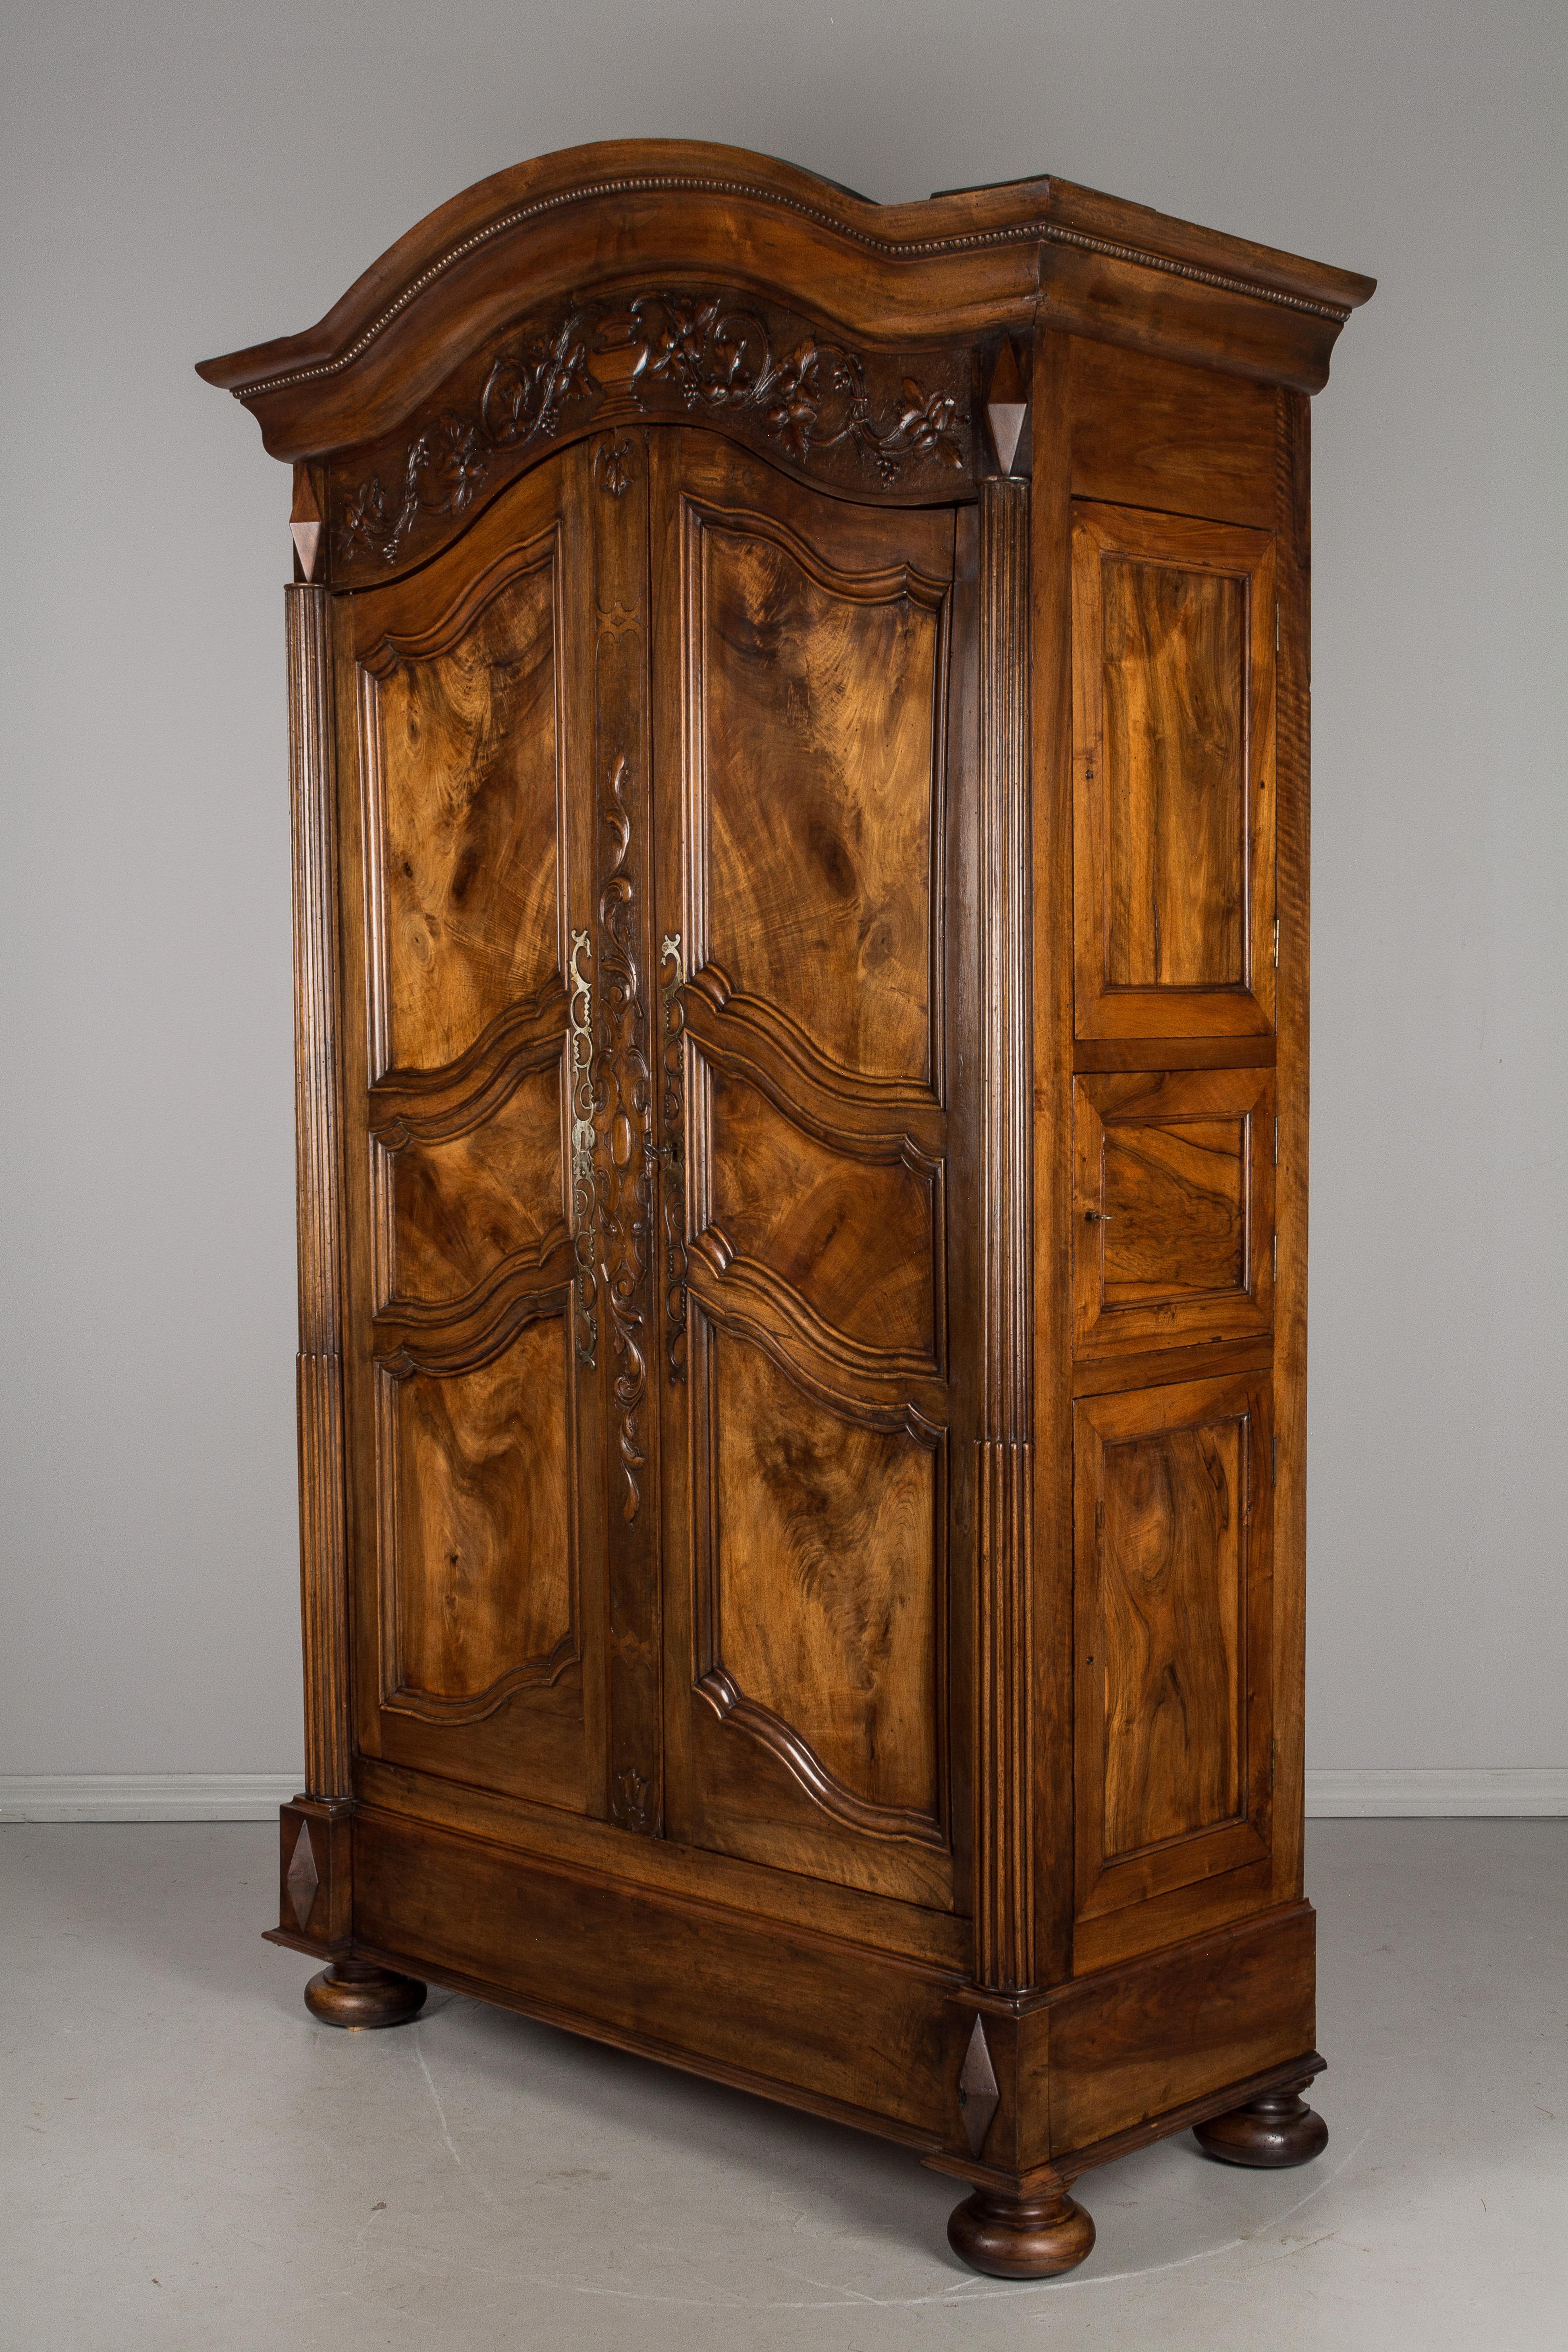 A large early 19th century French armoire from Burgundy, made of solid walnut. Three book-matched panels of burled walnut with boldly patterned knots are nicely framed on each door. Interior has two shelves and one shelf with three dovetailed